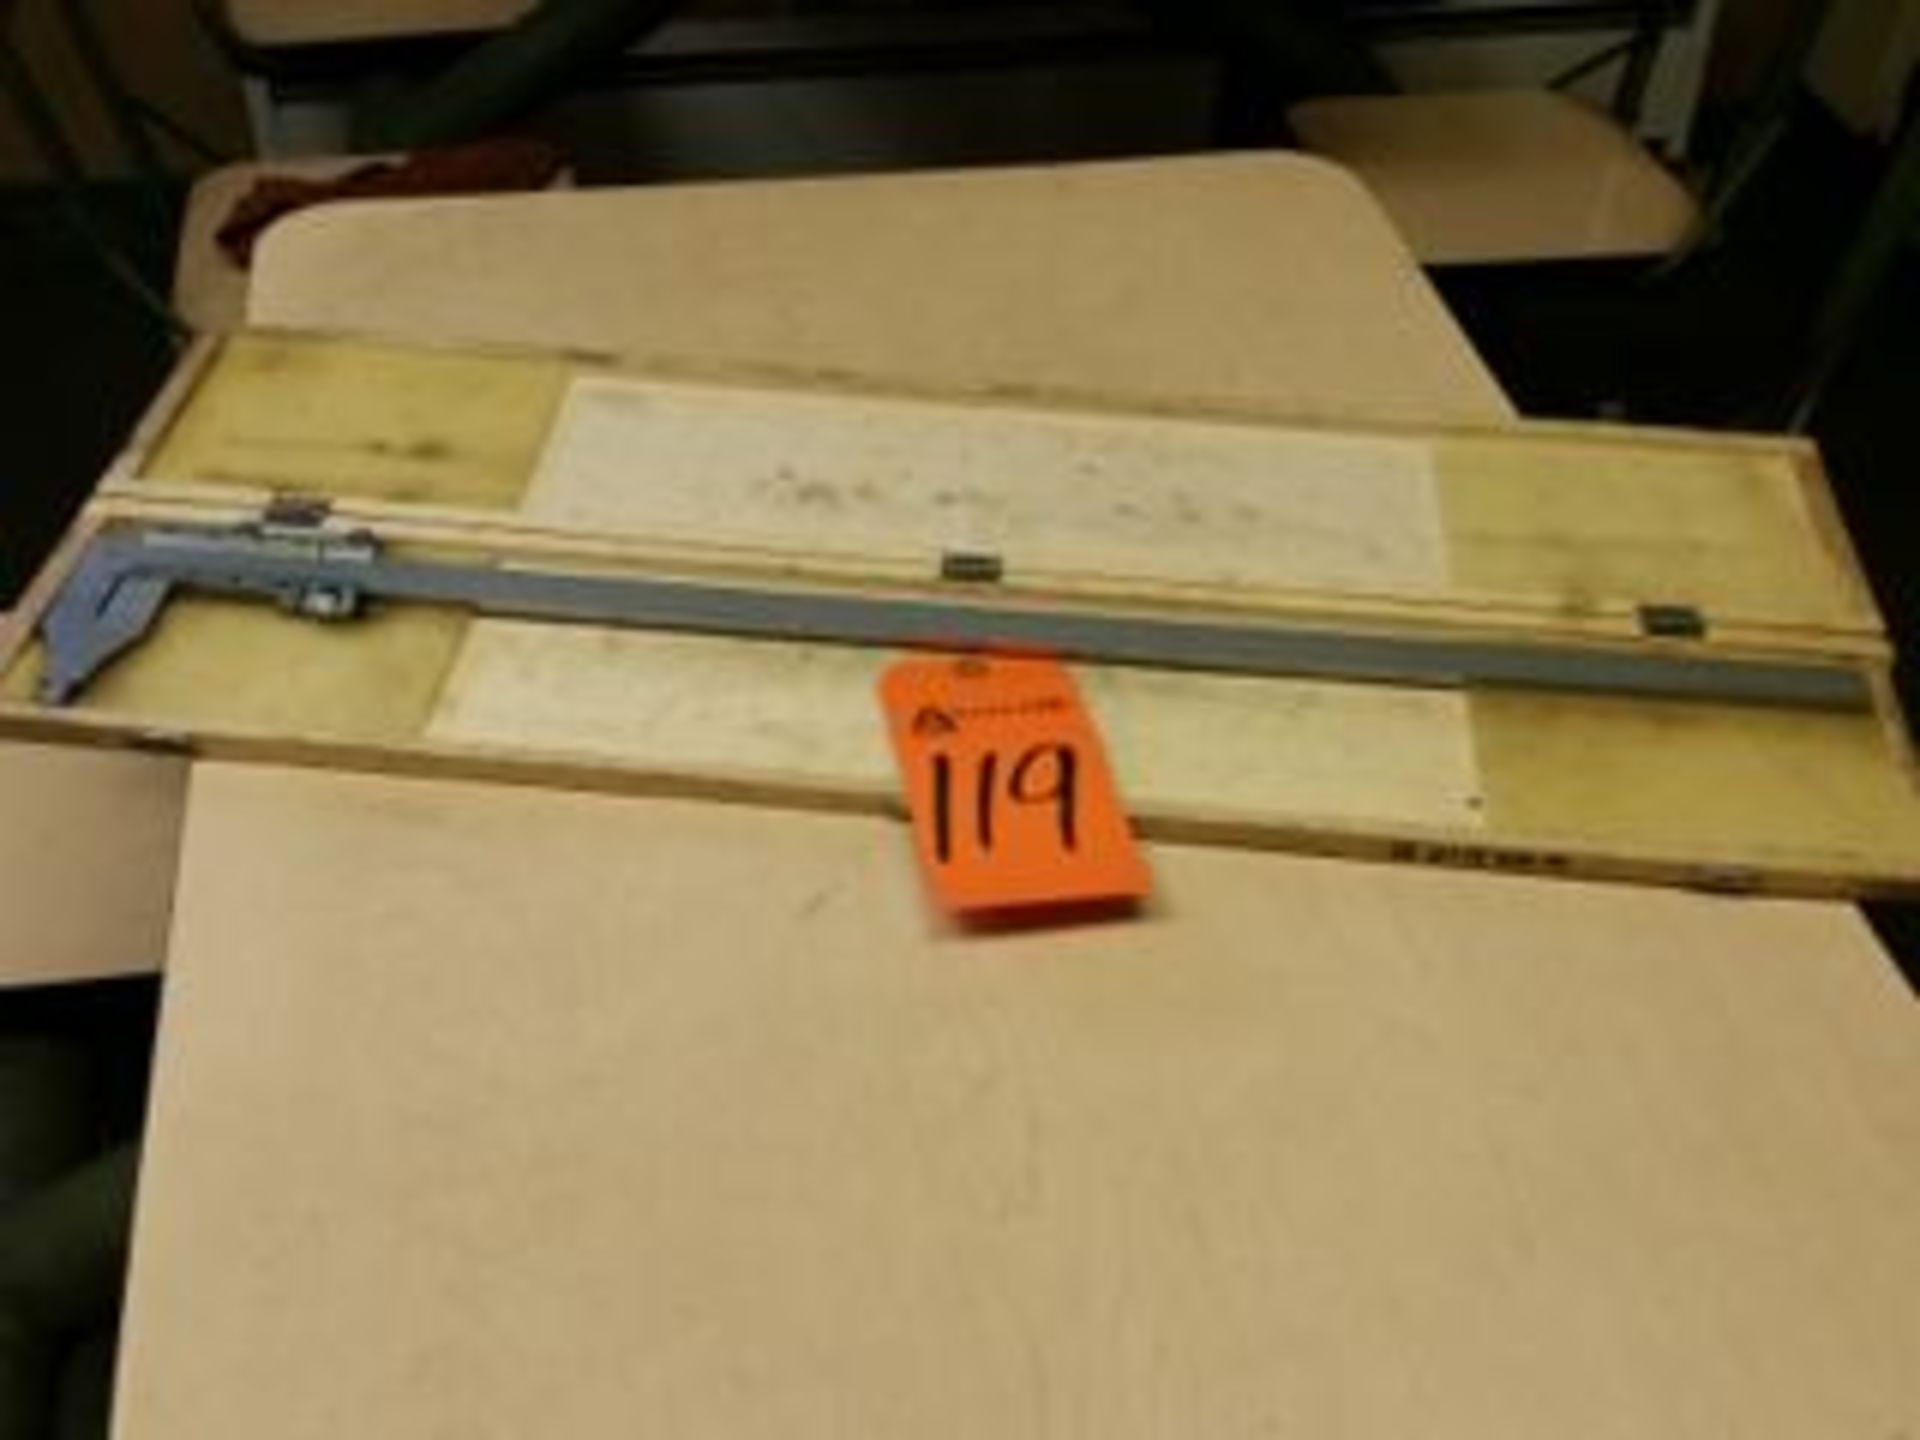 24" verner metric and imperial